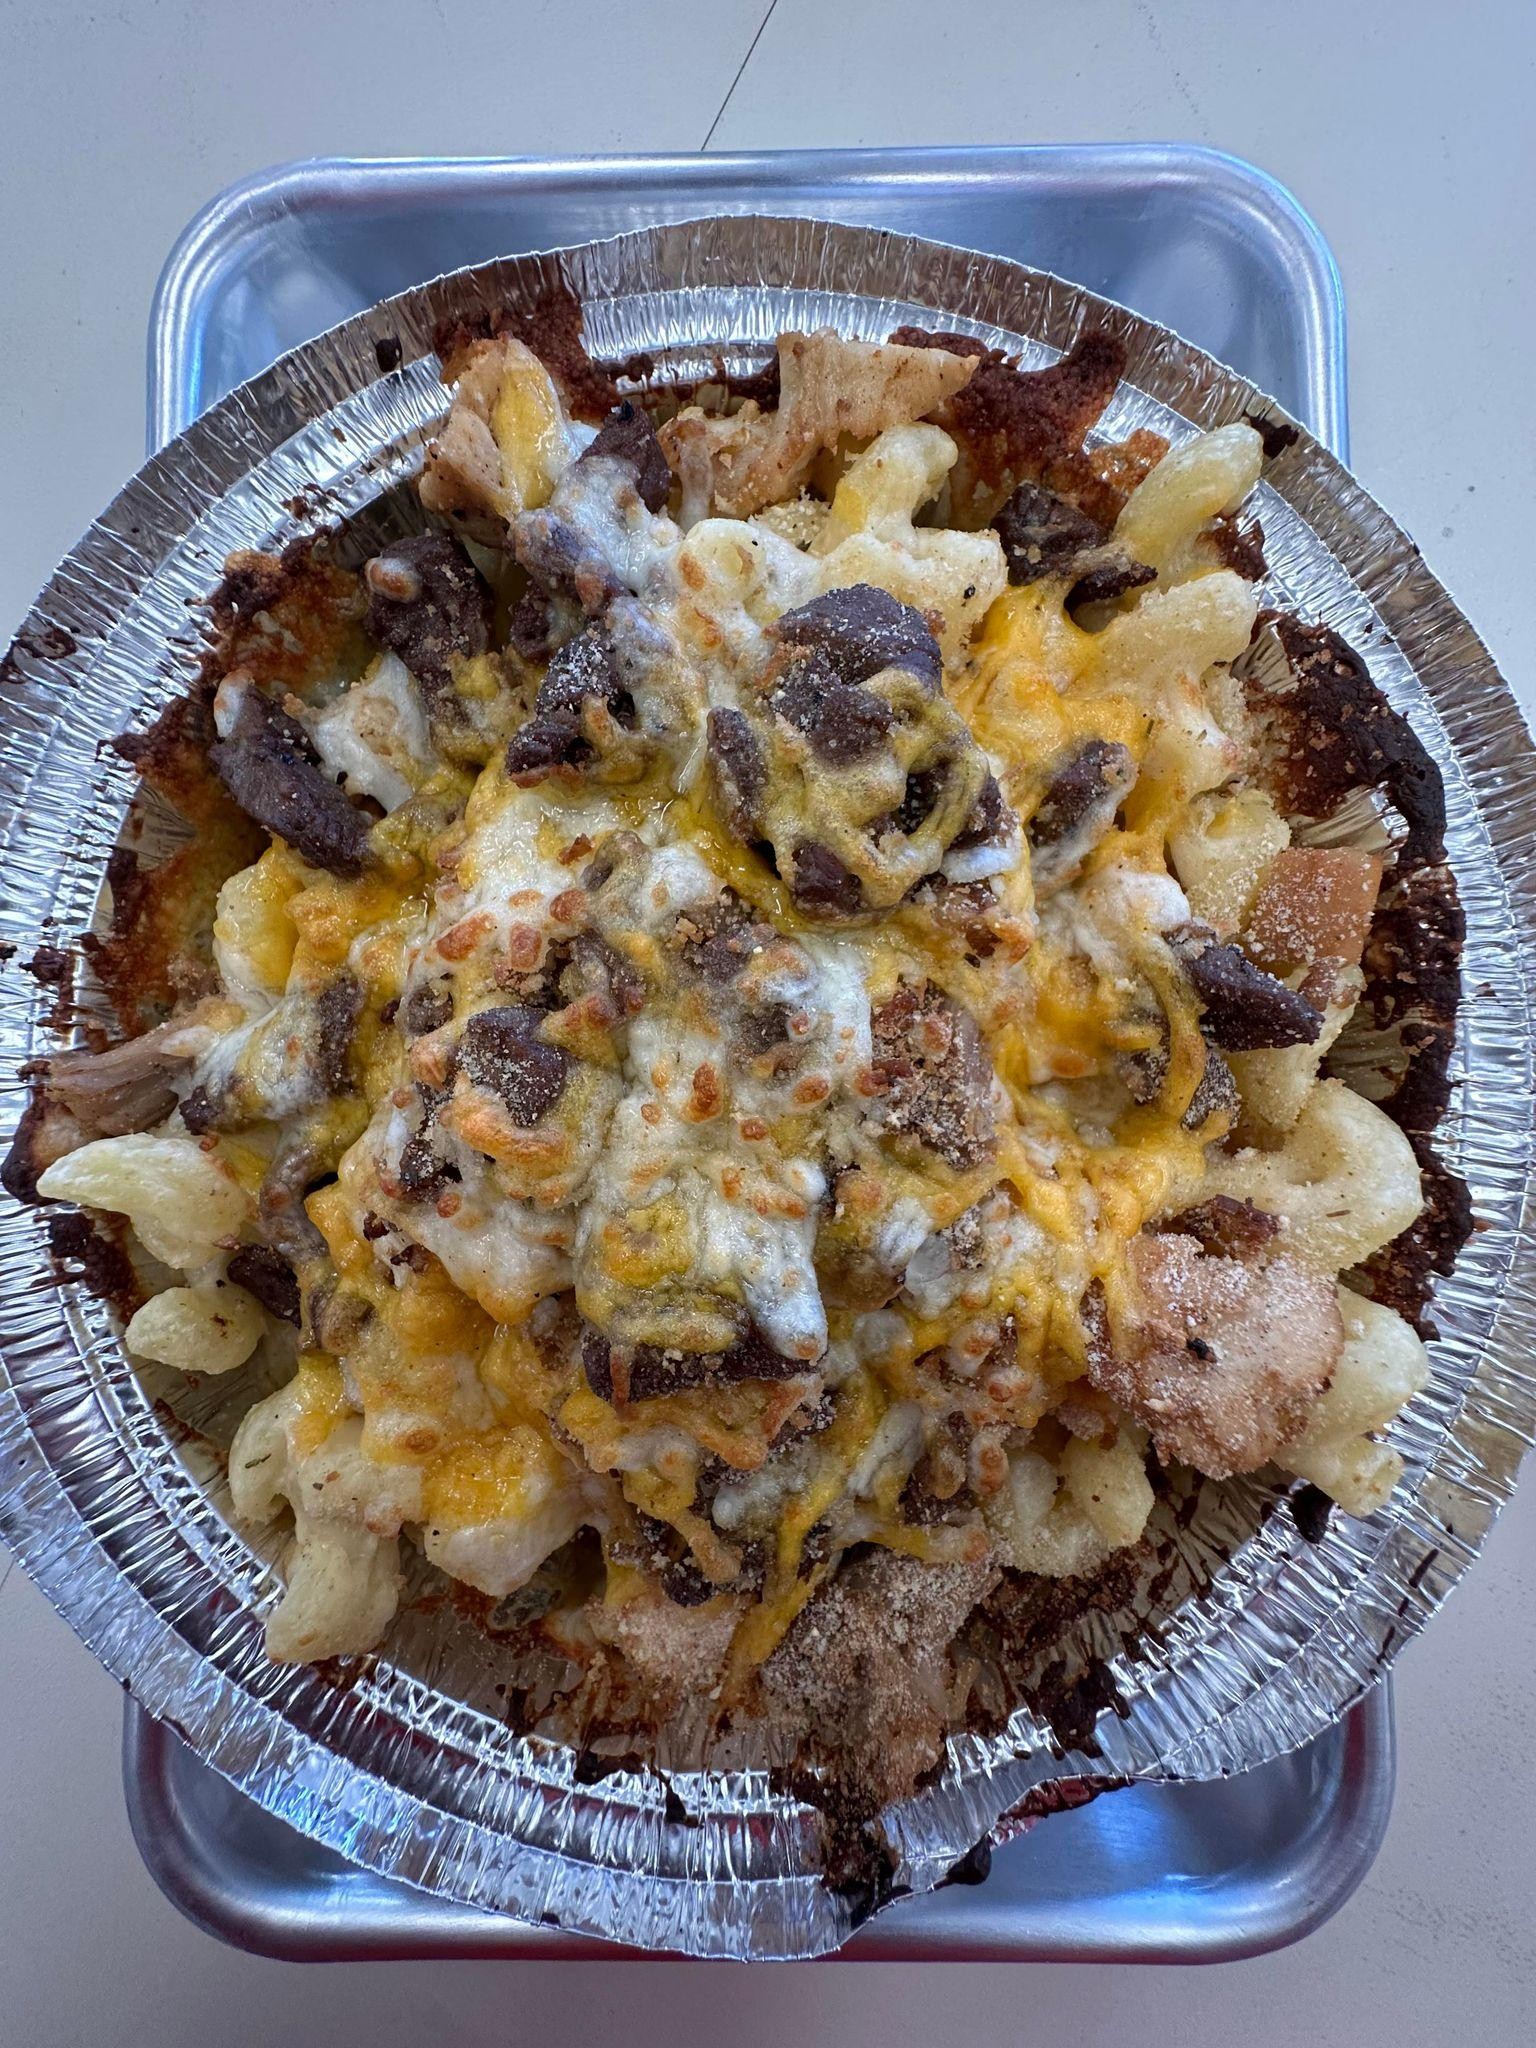 The Meat Mac